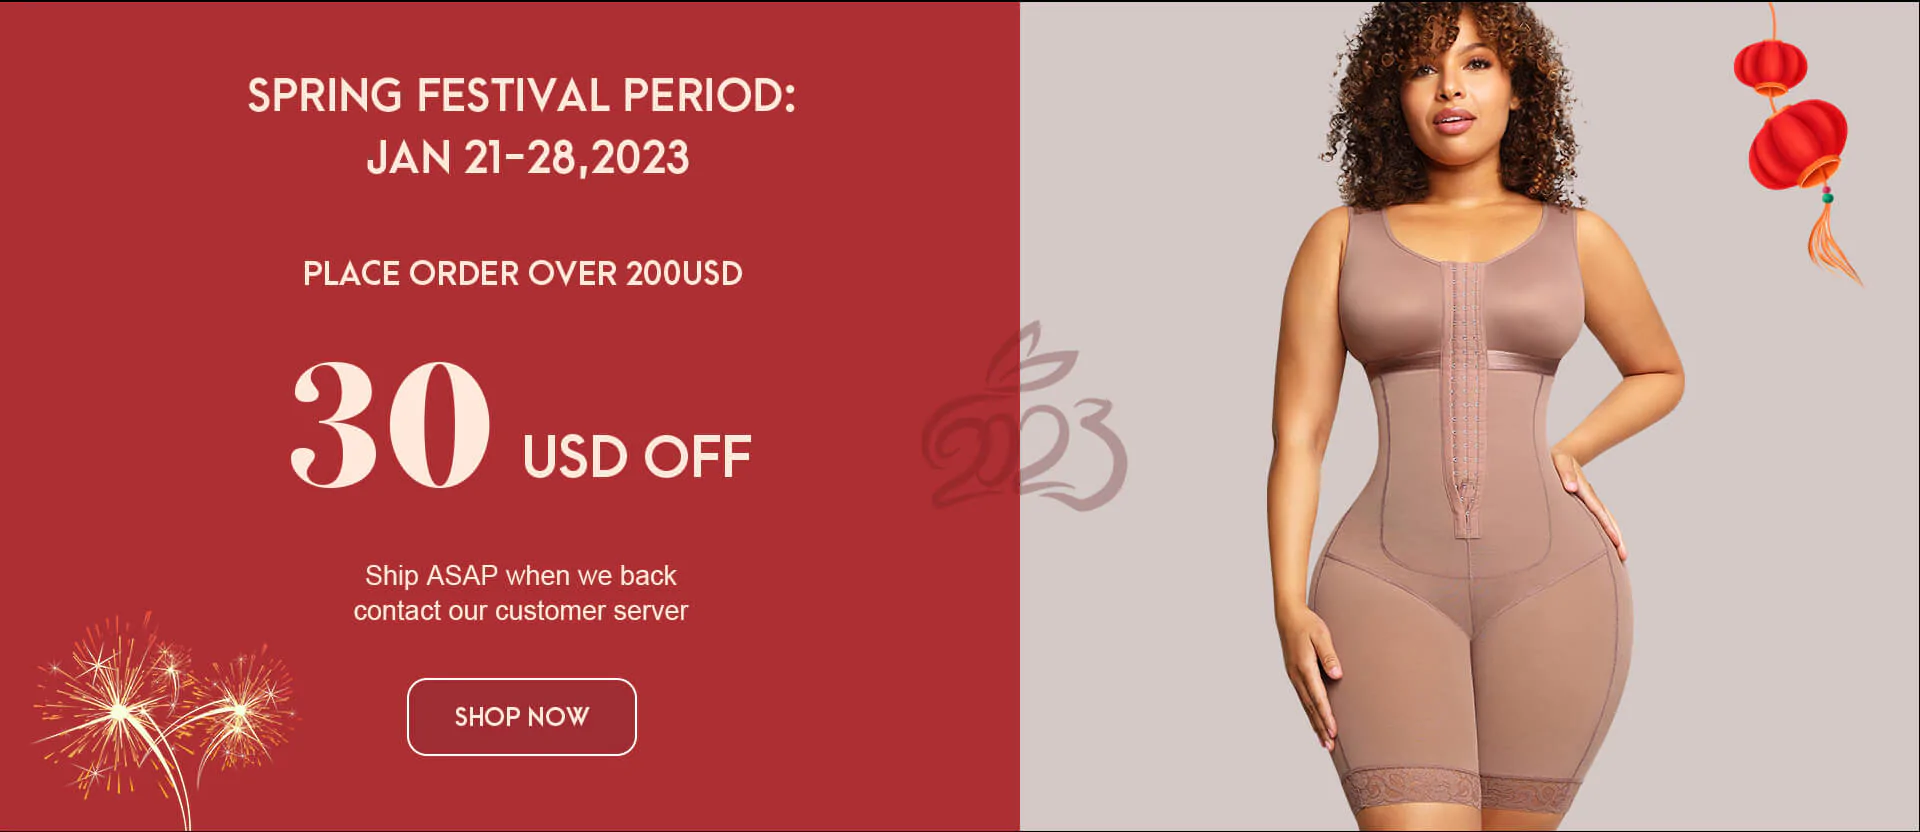 What to Look for When Evaluating Shapewear Suppliers